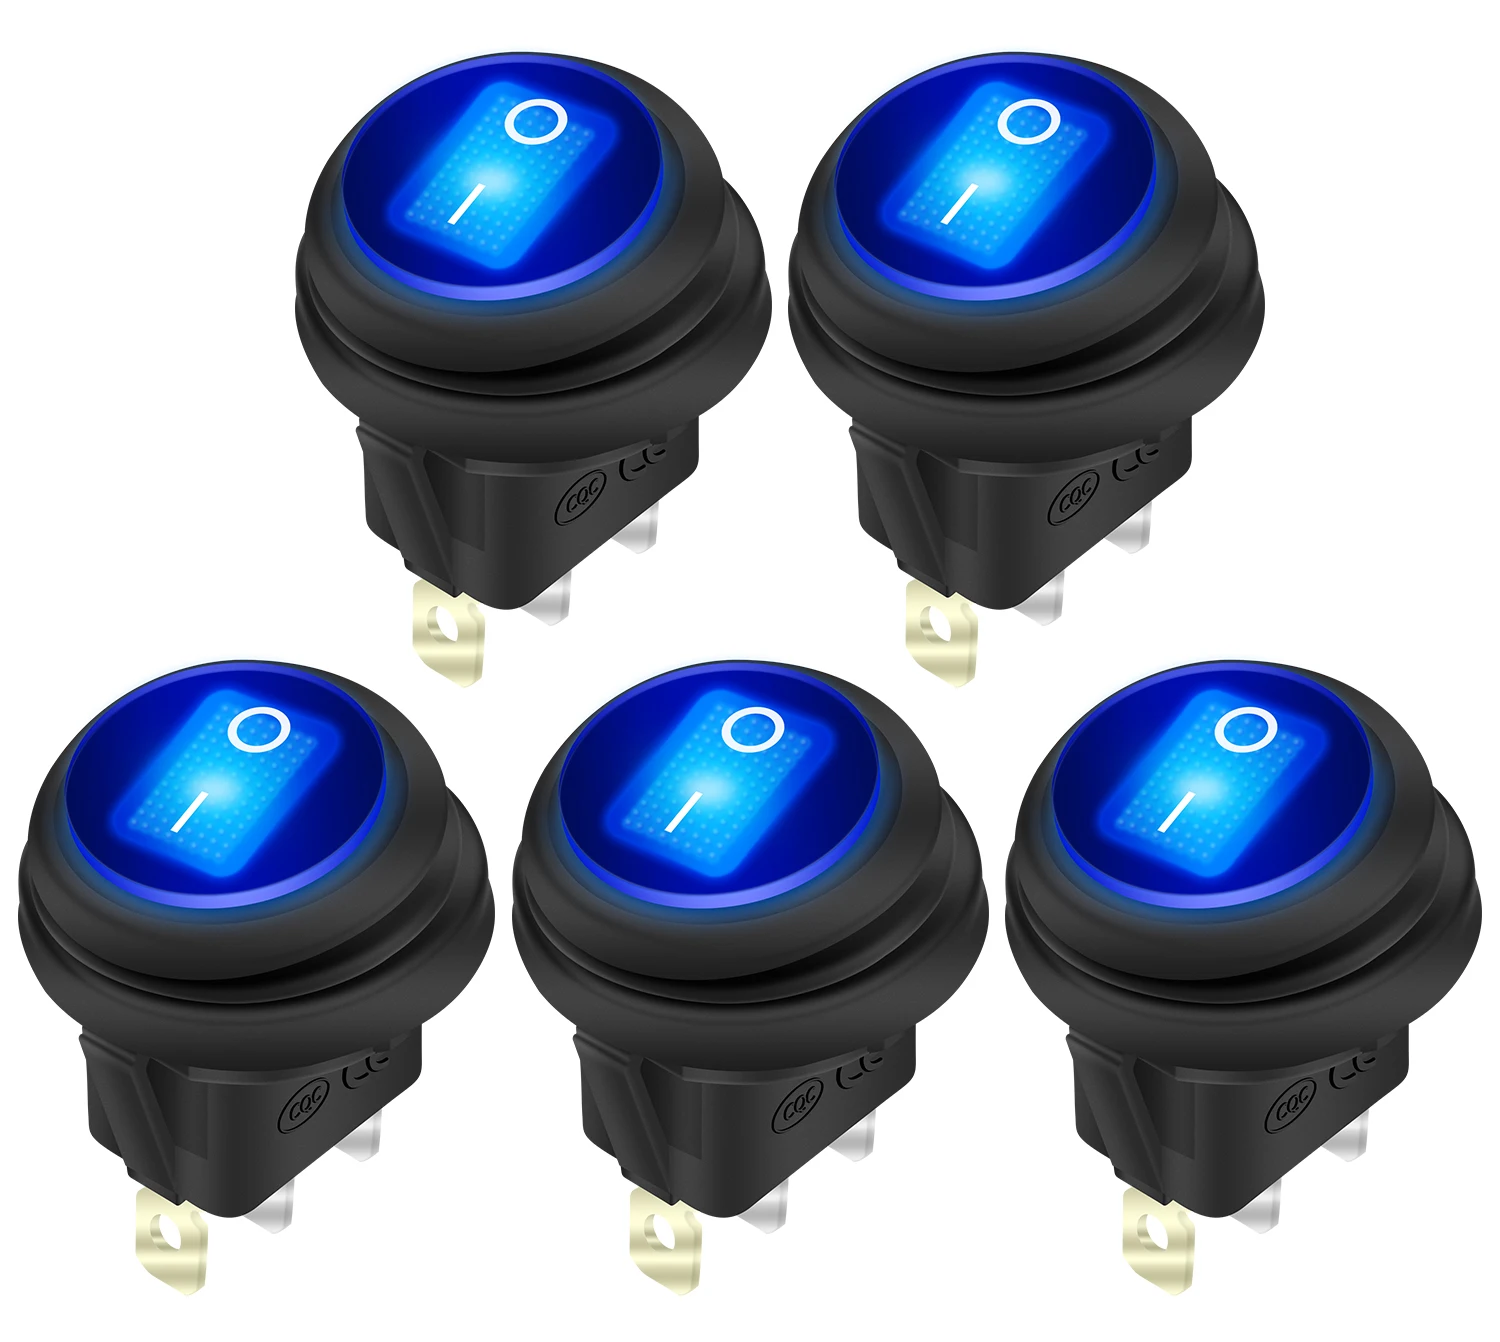 

12V 20A Rocker Switch Waterproof Red Blue LED Lighted Round ON Off 3 Pin Weatherproof Toggle Rocker Switches for Marine Car 5Pcs